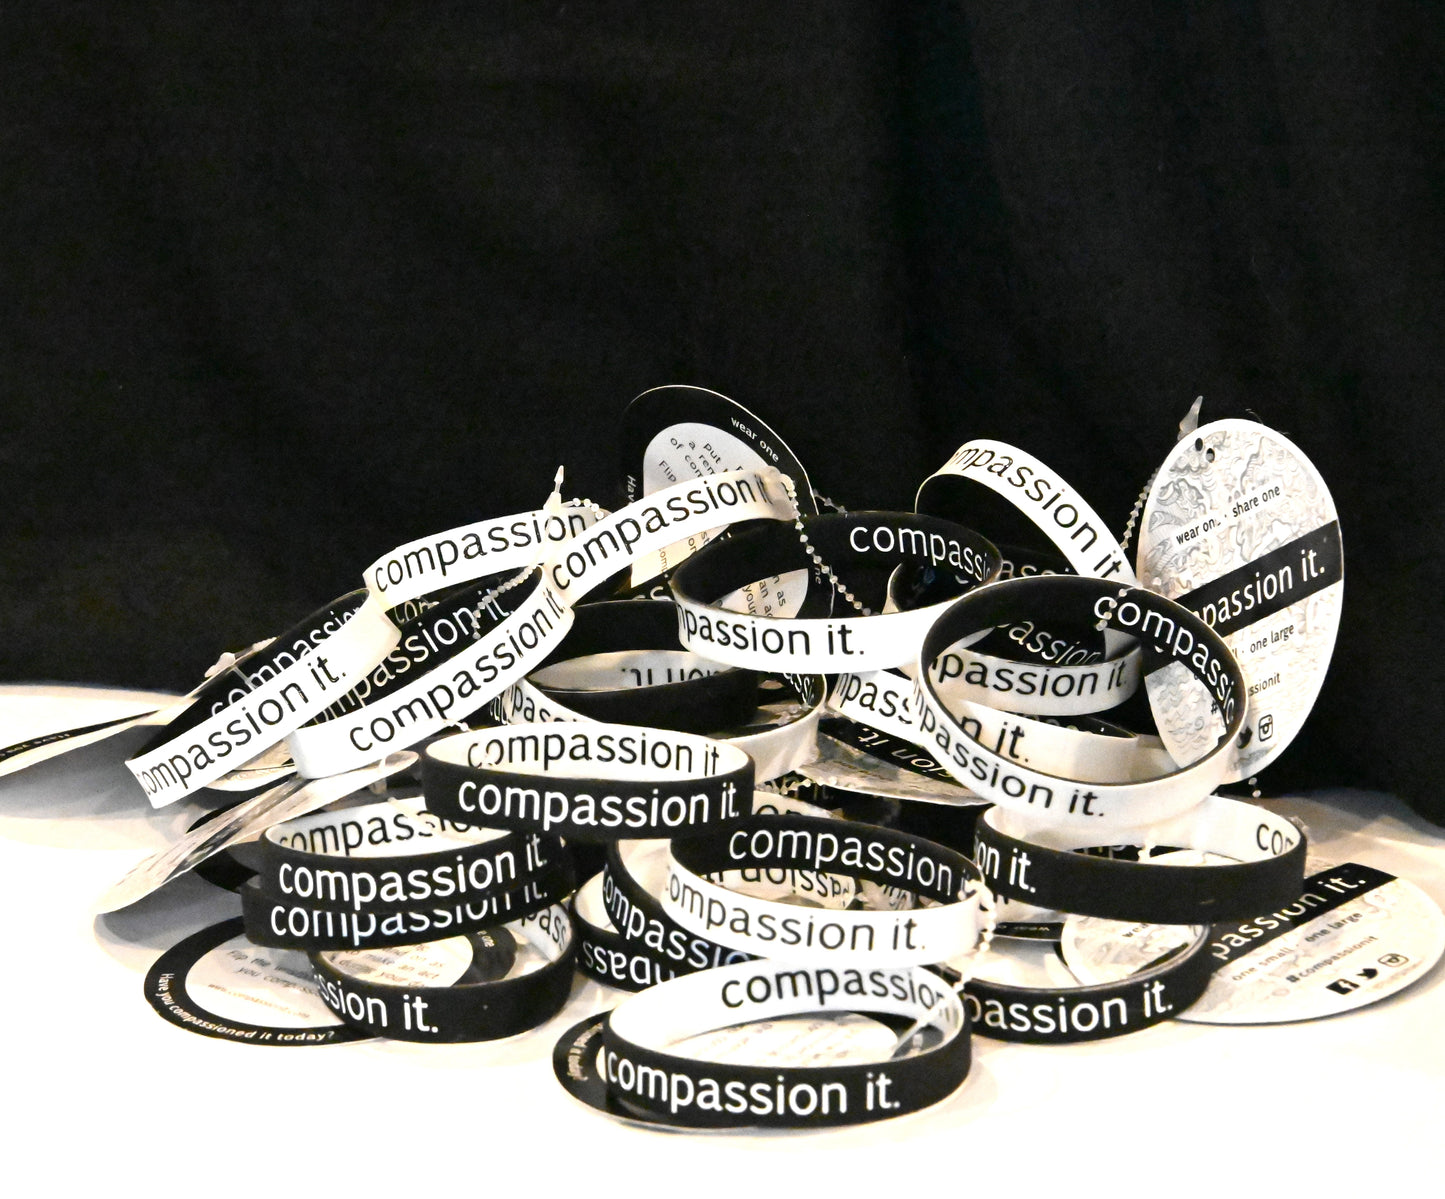 Compassion It Wristbands - Family package